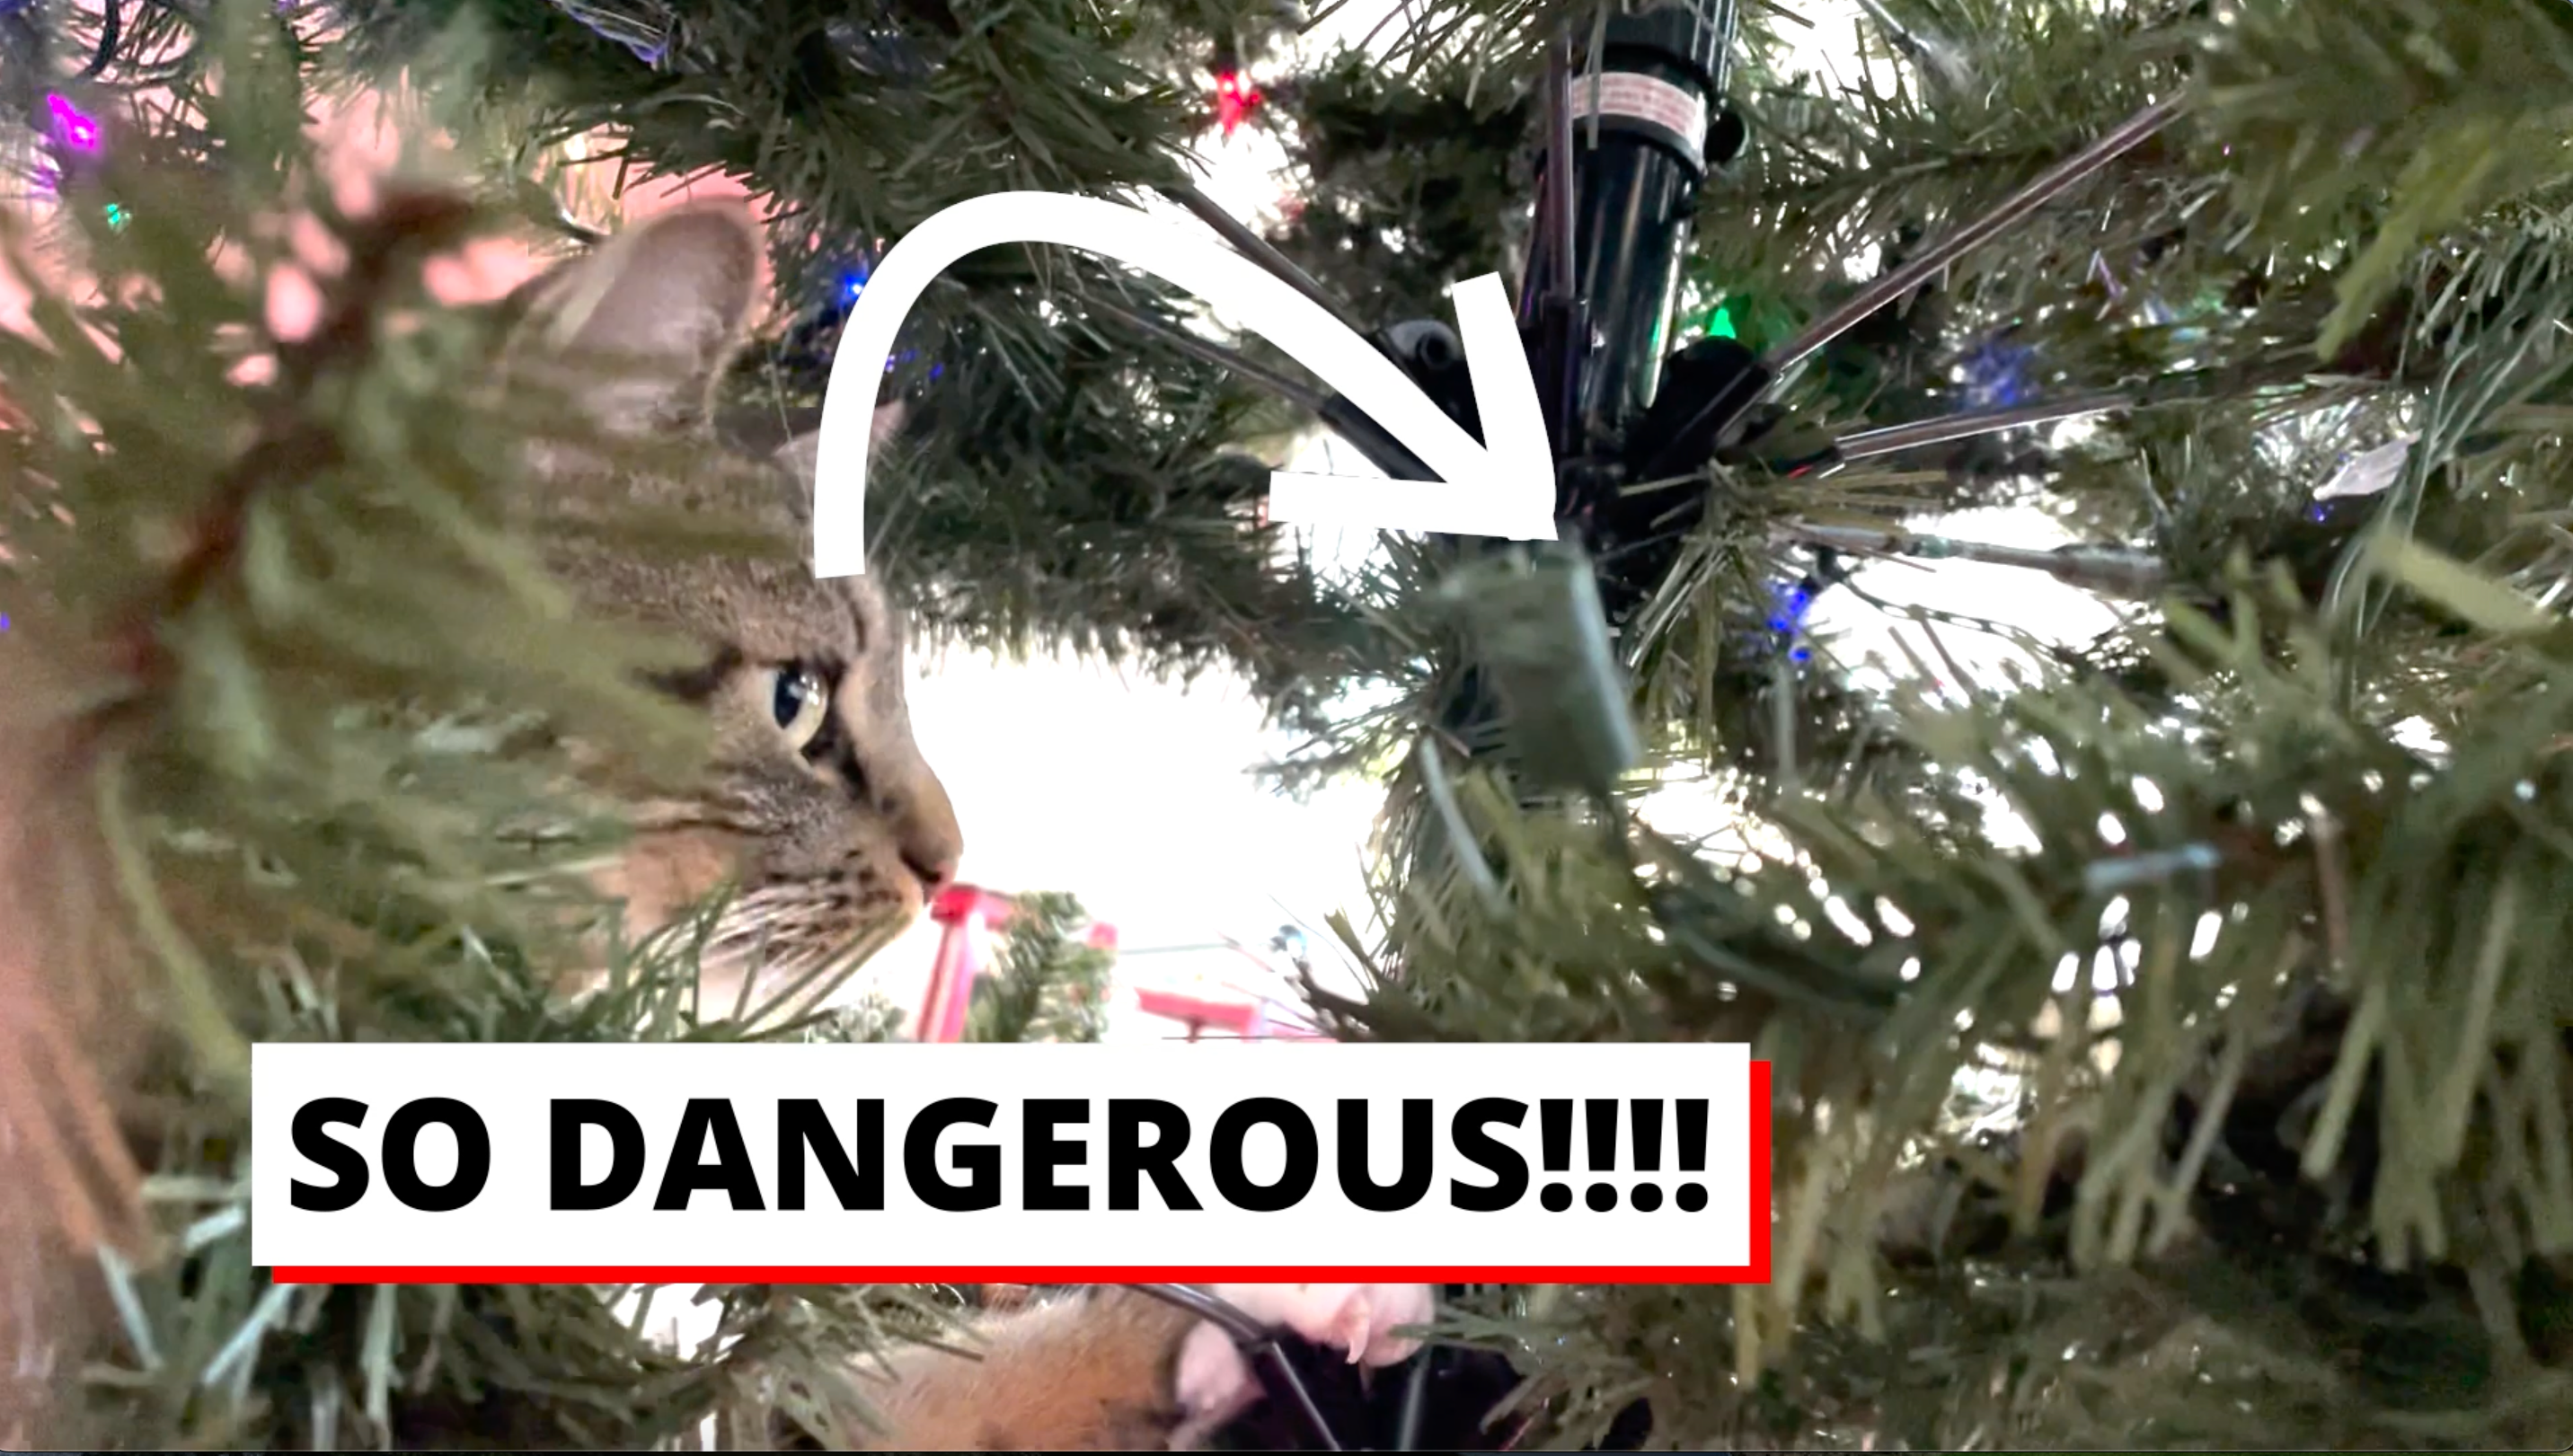 Load video: A woman decorating the Christmas tree while her cat runs under the tree. Then we see multiple cats chewing on the tree and lights, as well as the broken lights they have chewed. Then we see the Shoo Cat ultrasonic cat trainer be placed under the tree. The cats avoid the Shoo Cat, approaching it and quickly walking away.